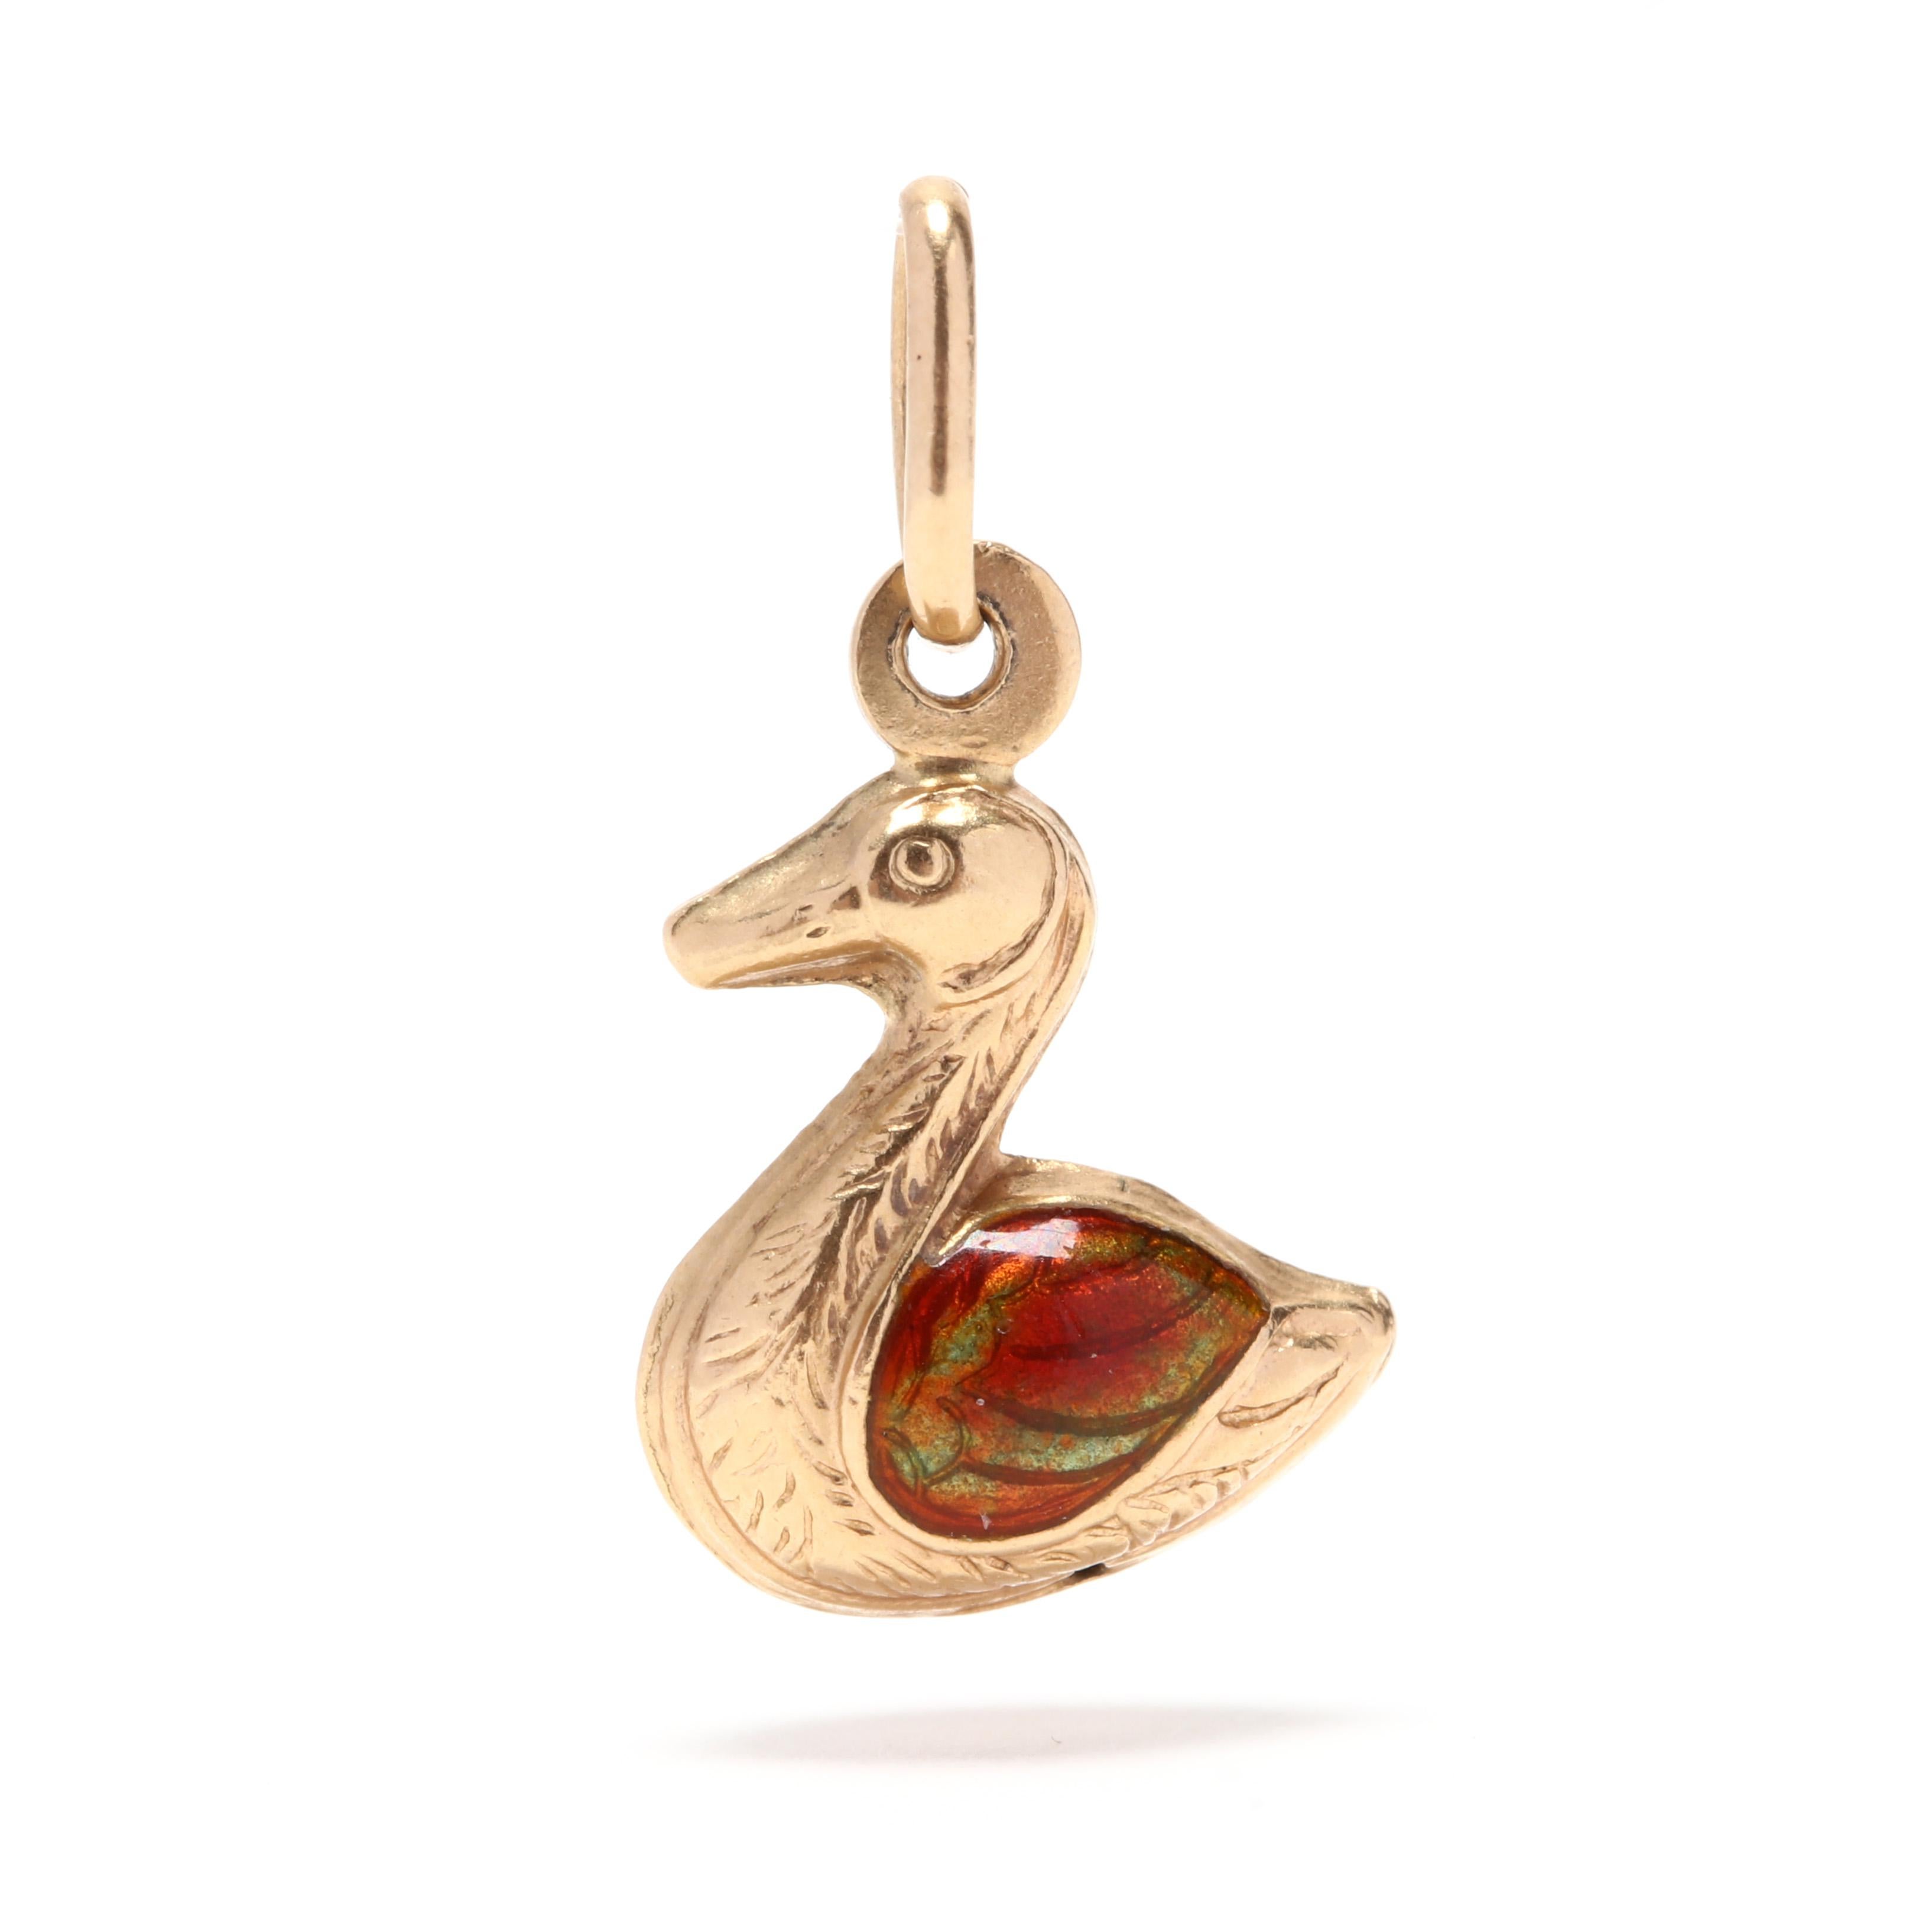 A small 14 karat yellow gold and enamel duck charm / pendant. This charm features a three dimensional, puffed duck motif with green and red enamel wings.

Length: 7/8 in.

Width: 1/2 in.

.85 dwts.

* Please note that this is a vintage item and may